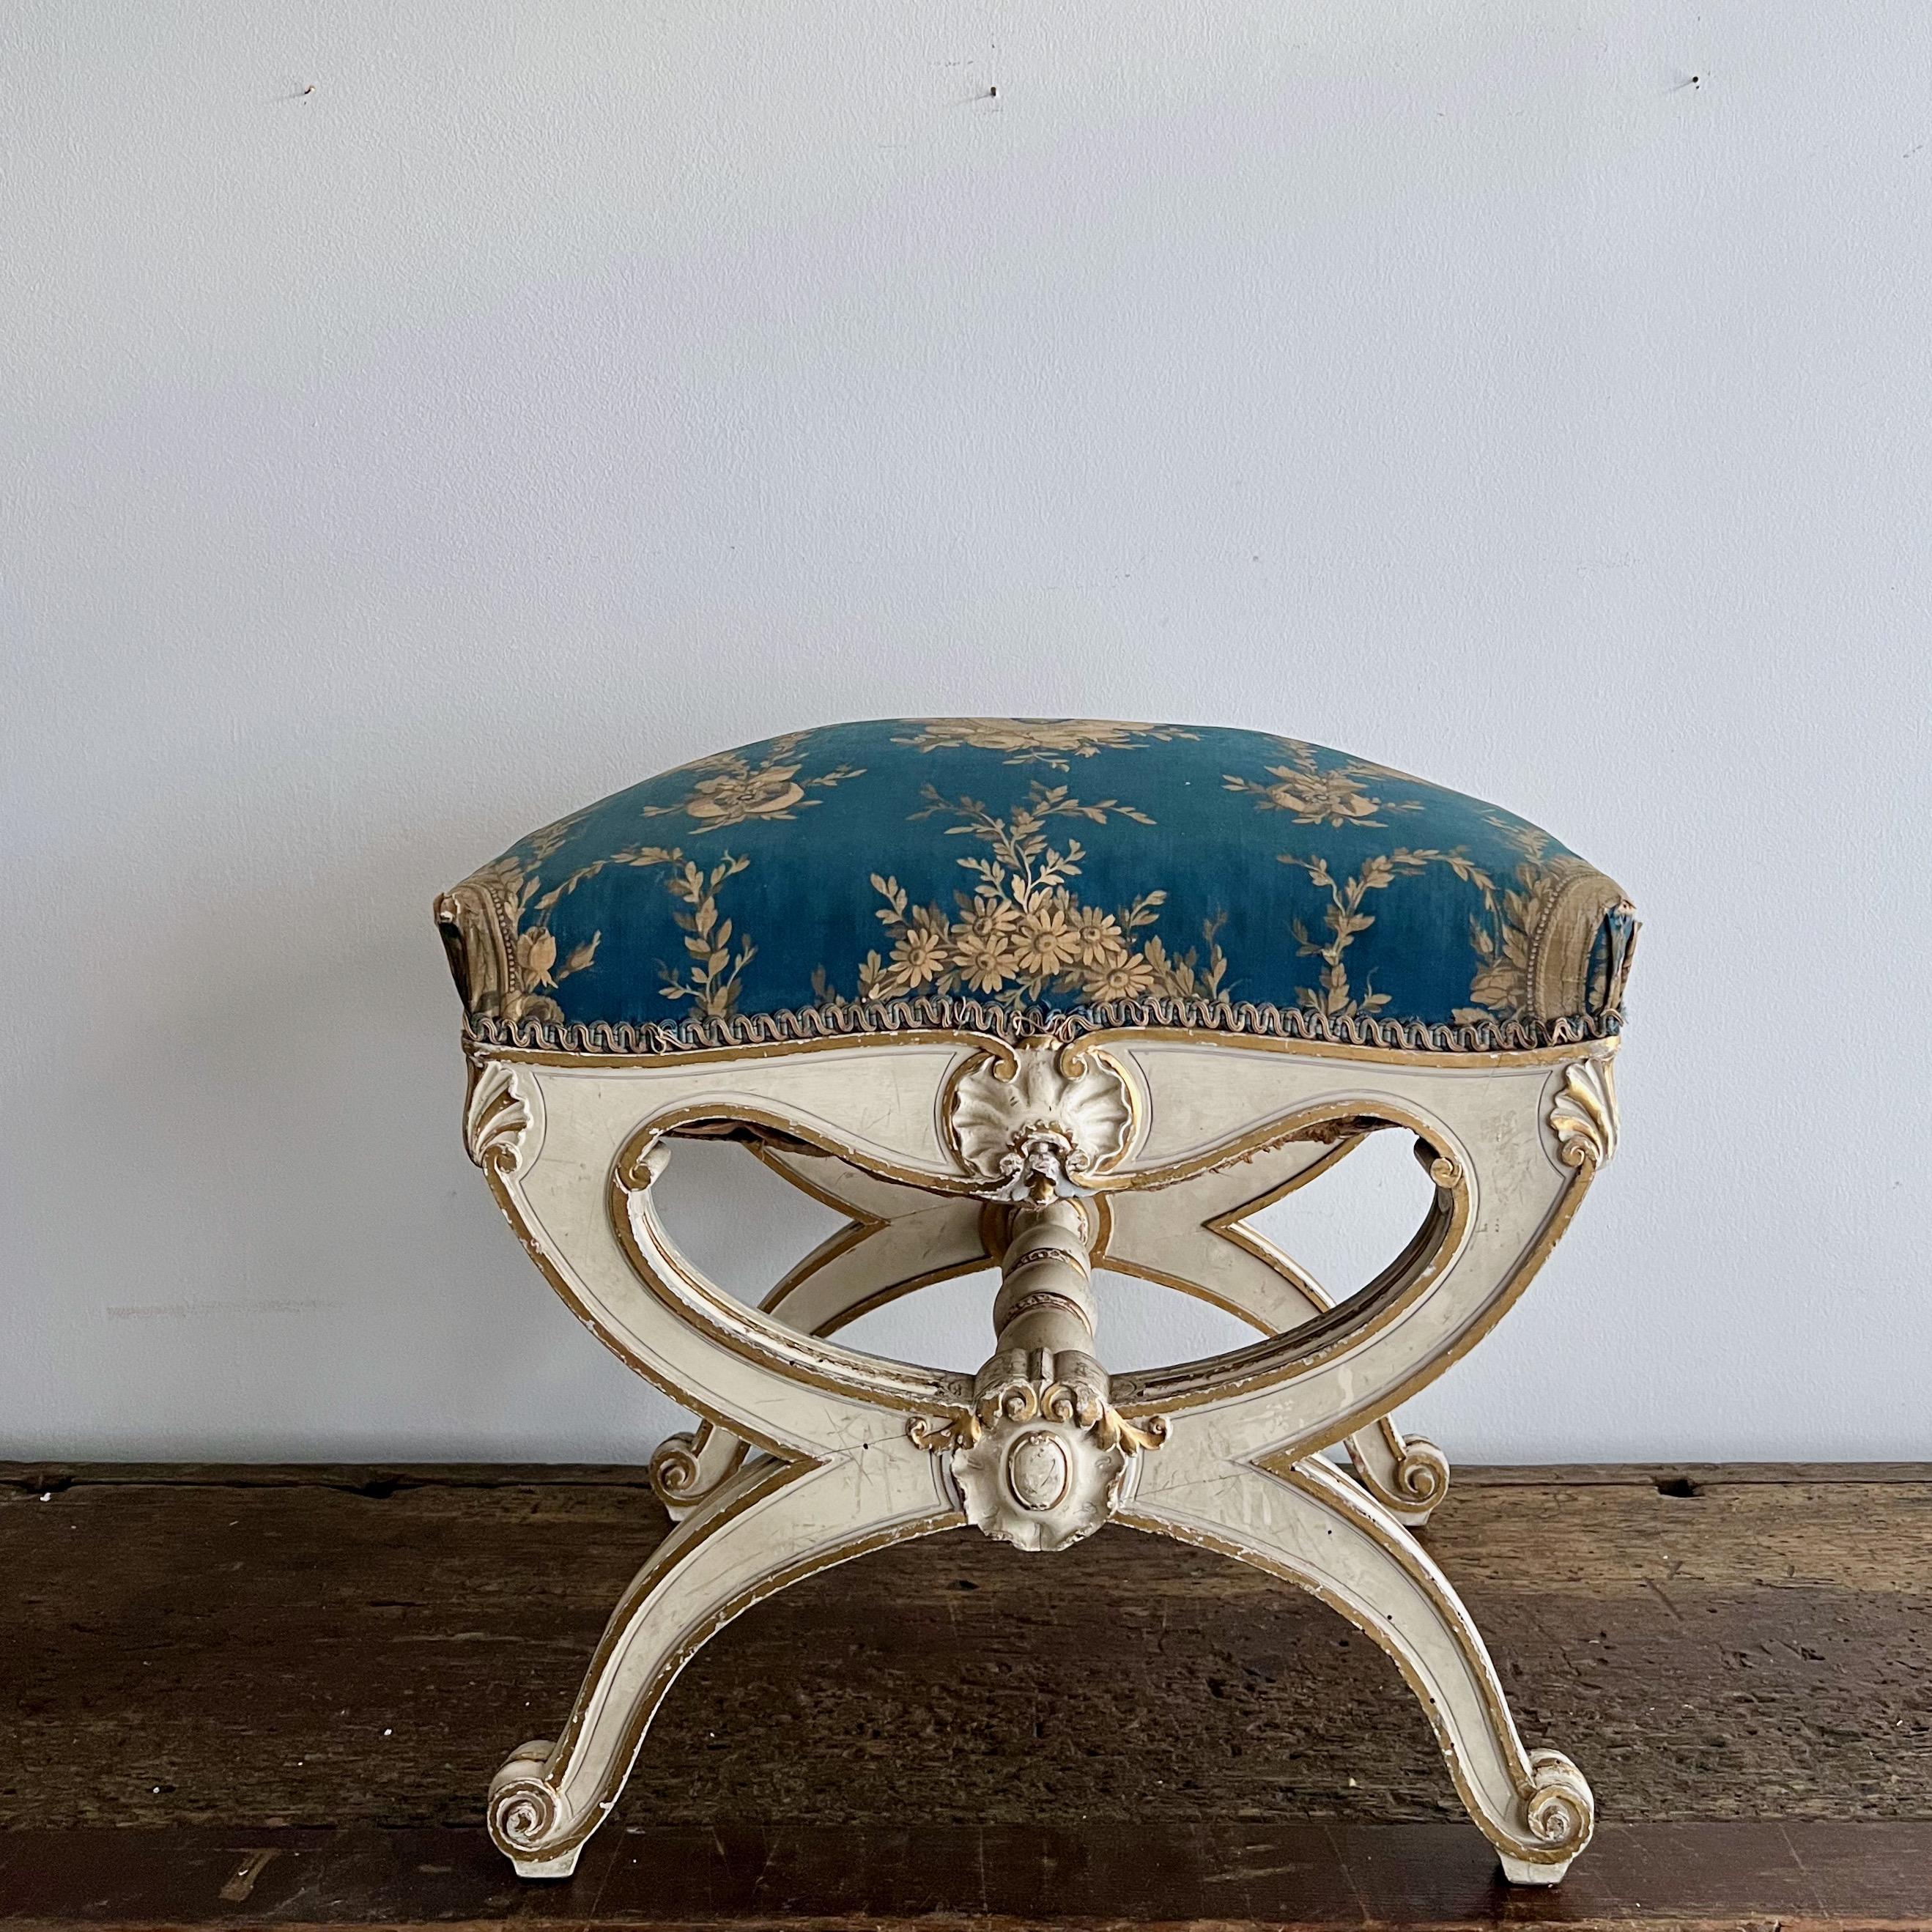 Pair of 19th century Italian Polychrome and Parcel-Gilt Curule Stools For Sale 5